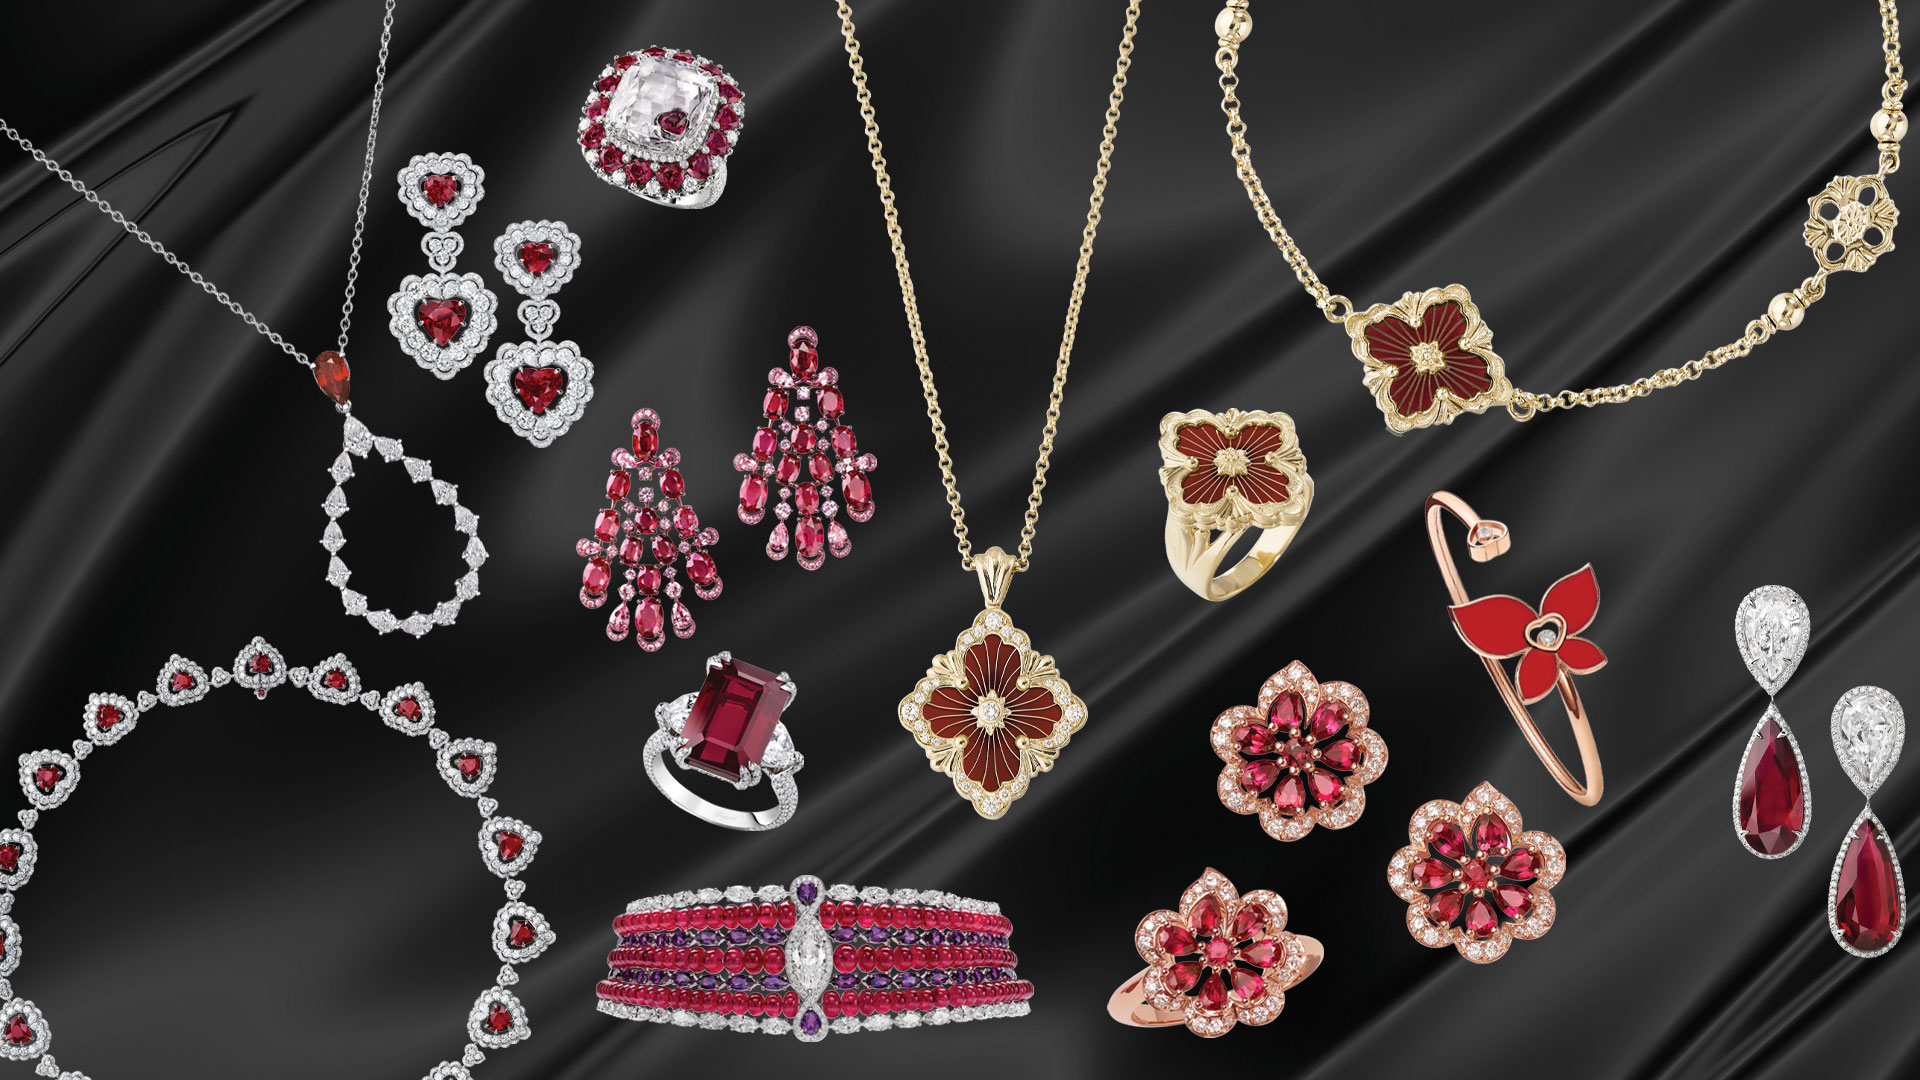 Red Ringer: Embracing Luck and Fortune – The resplendence of red jewelleries in Chinese New Year celebrations